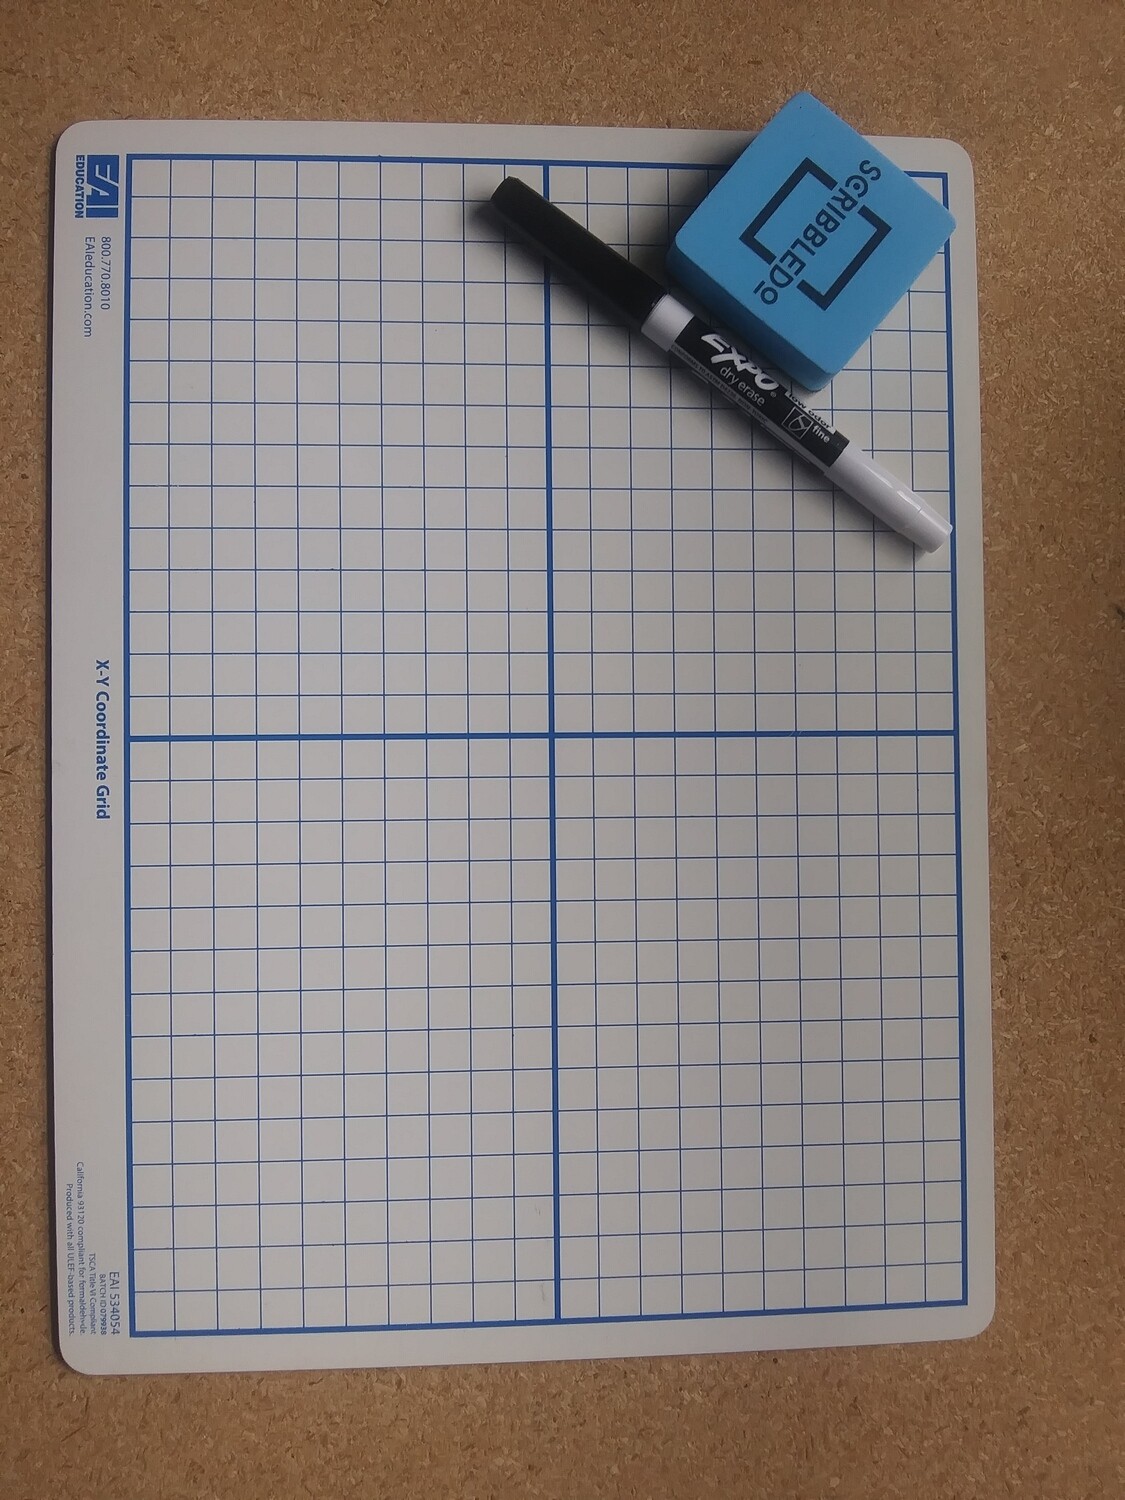 8.5 x11 inch Dry-Erase Board, double-sided